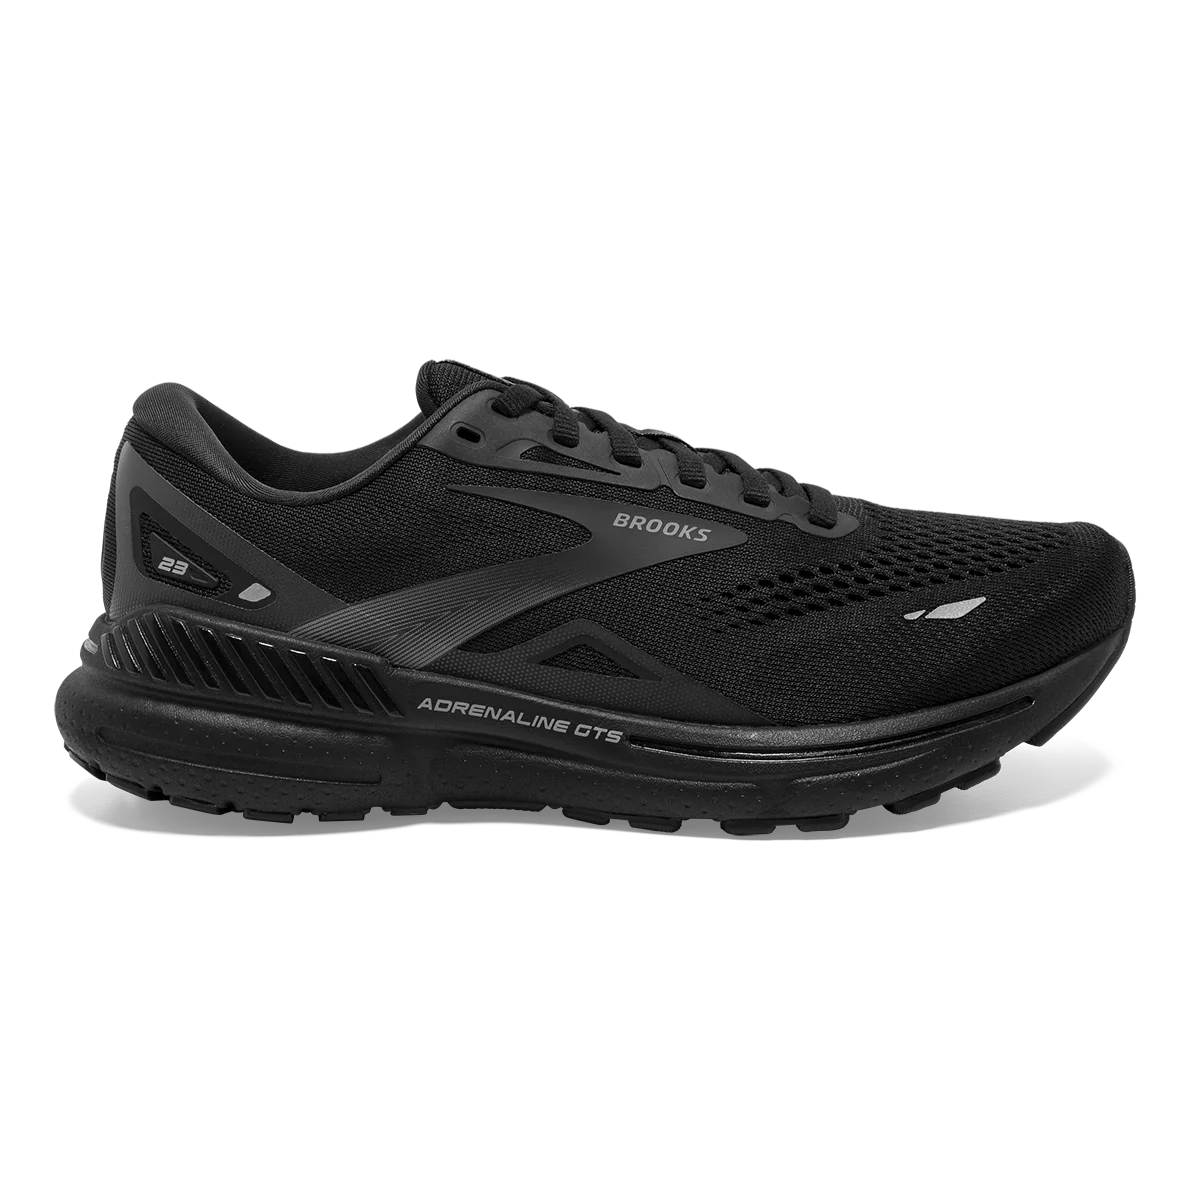 Lateral view of the Men's Adrenaline GTS by Brooks in the wide 2E width, color Black/Black/Ebony